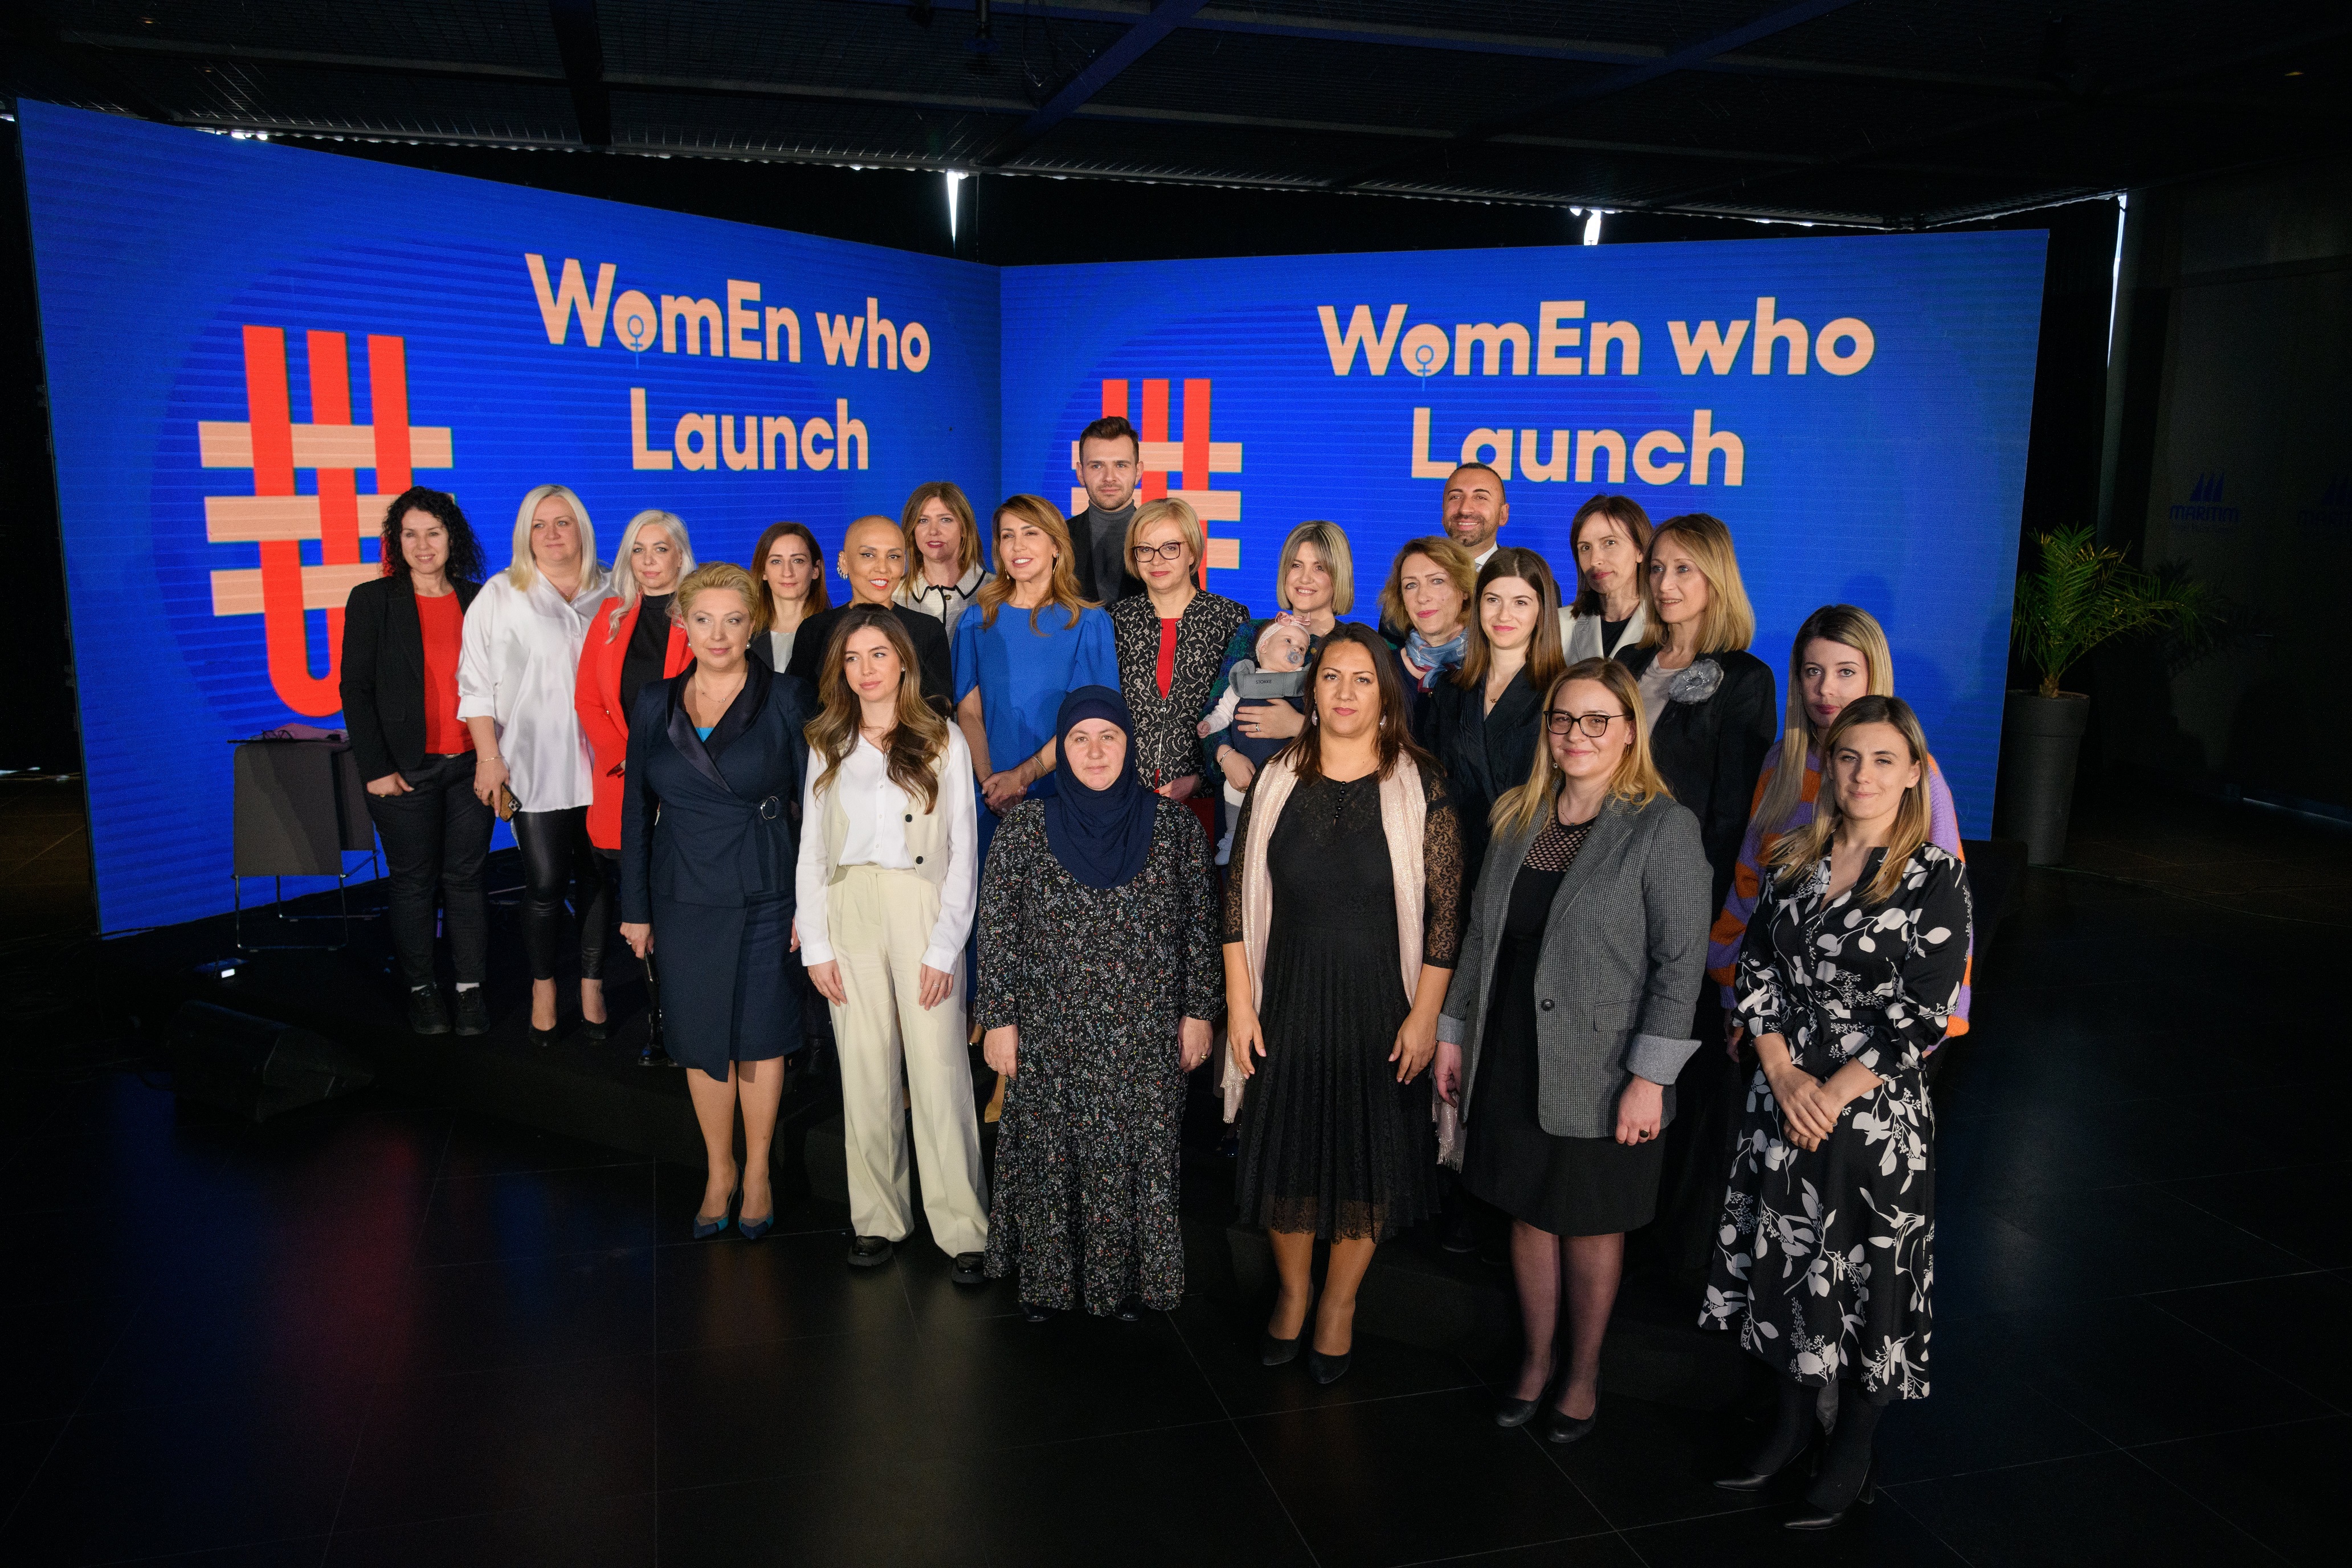 The Regional Cooperation Council (RCC) launched the first Regional Women in Entrepreneurship Network in the Western Balkans in Tirana on 11 March 2022 (Photo: RCC/Armand Habazaj)